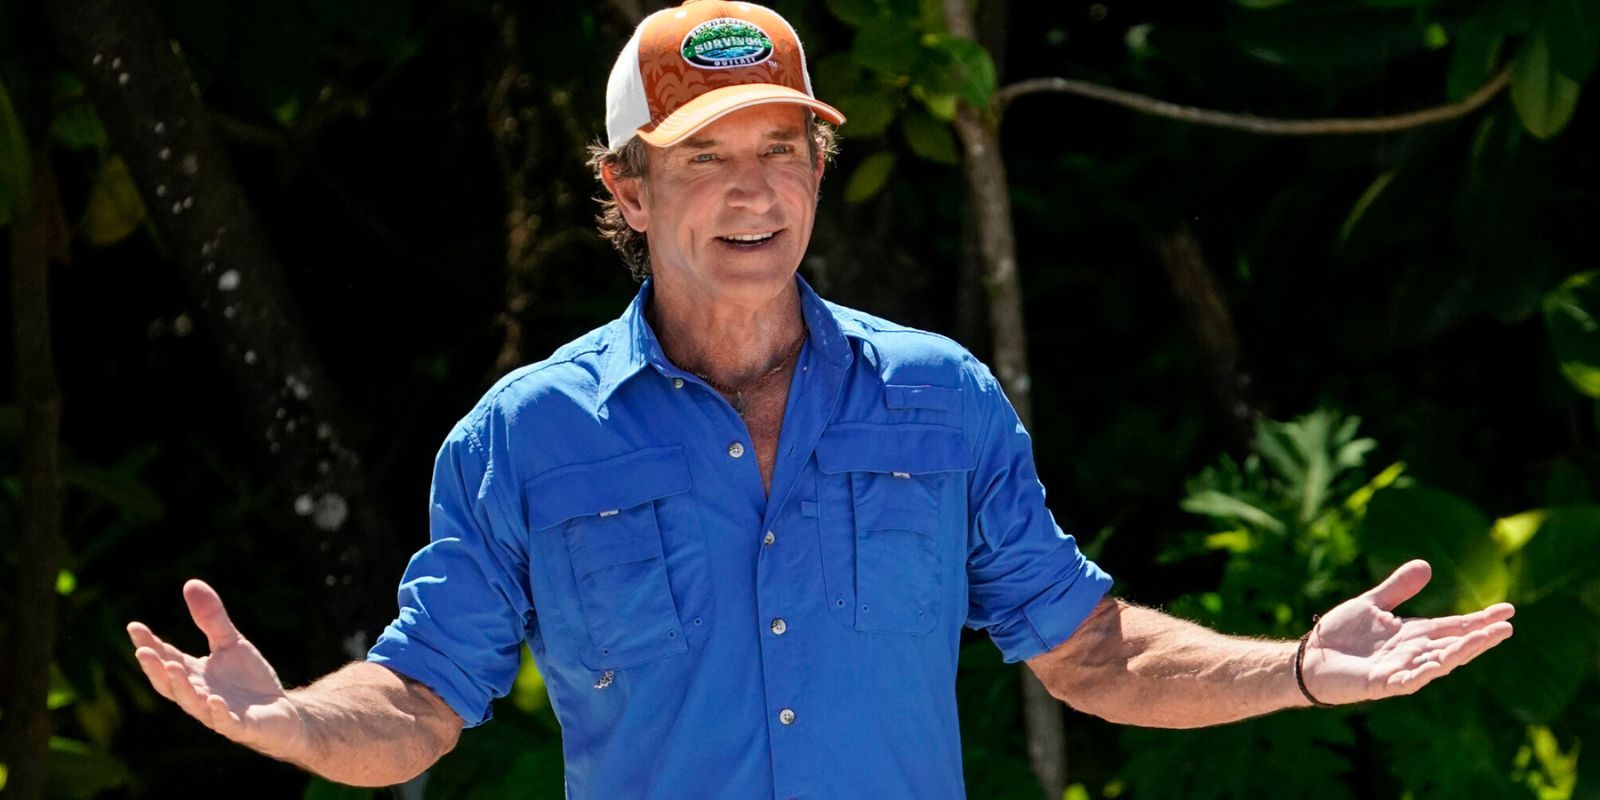 Jeff Probst with his arms wide open on the set of Survivor